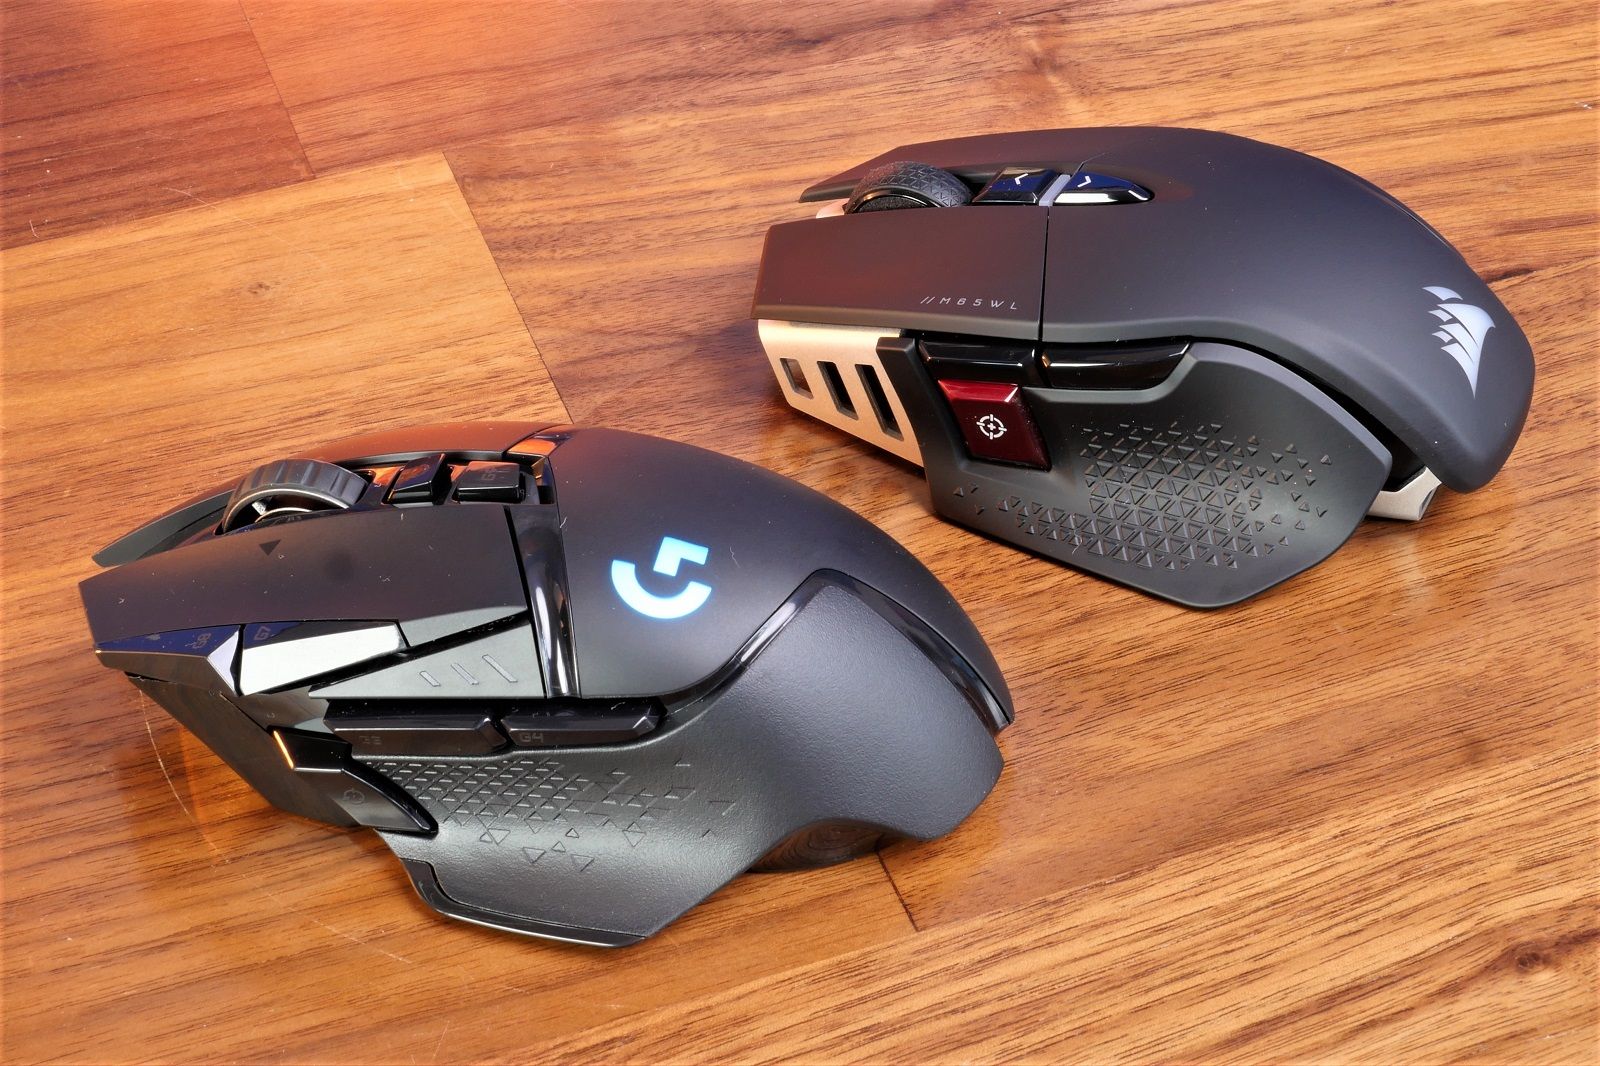 Other gaming mice photo 1